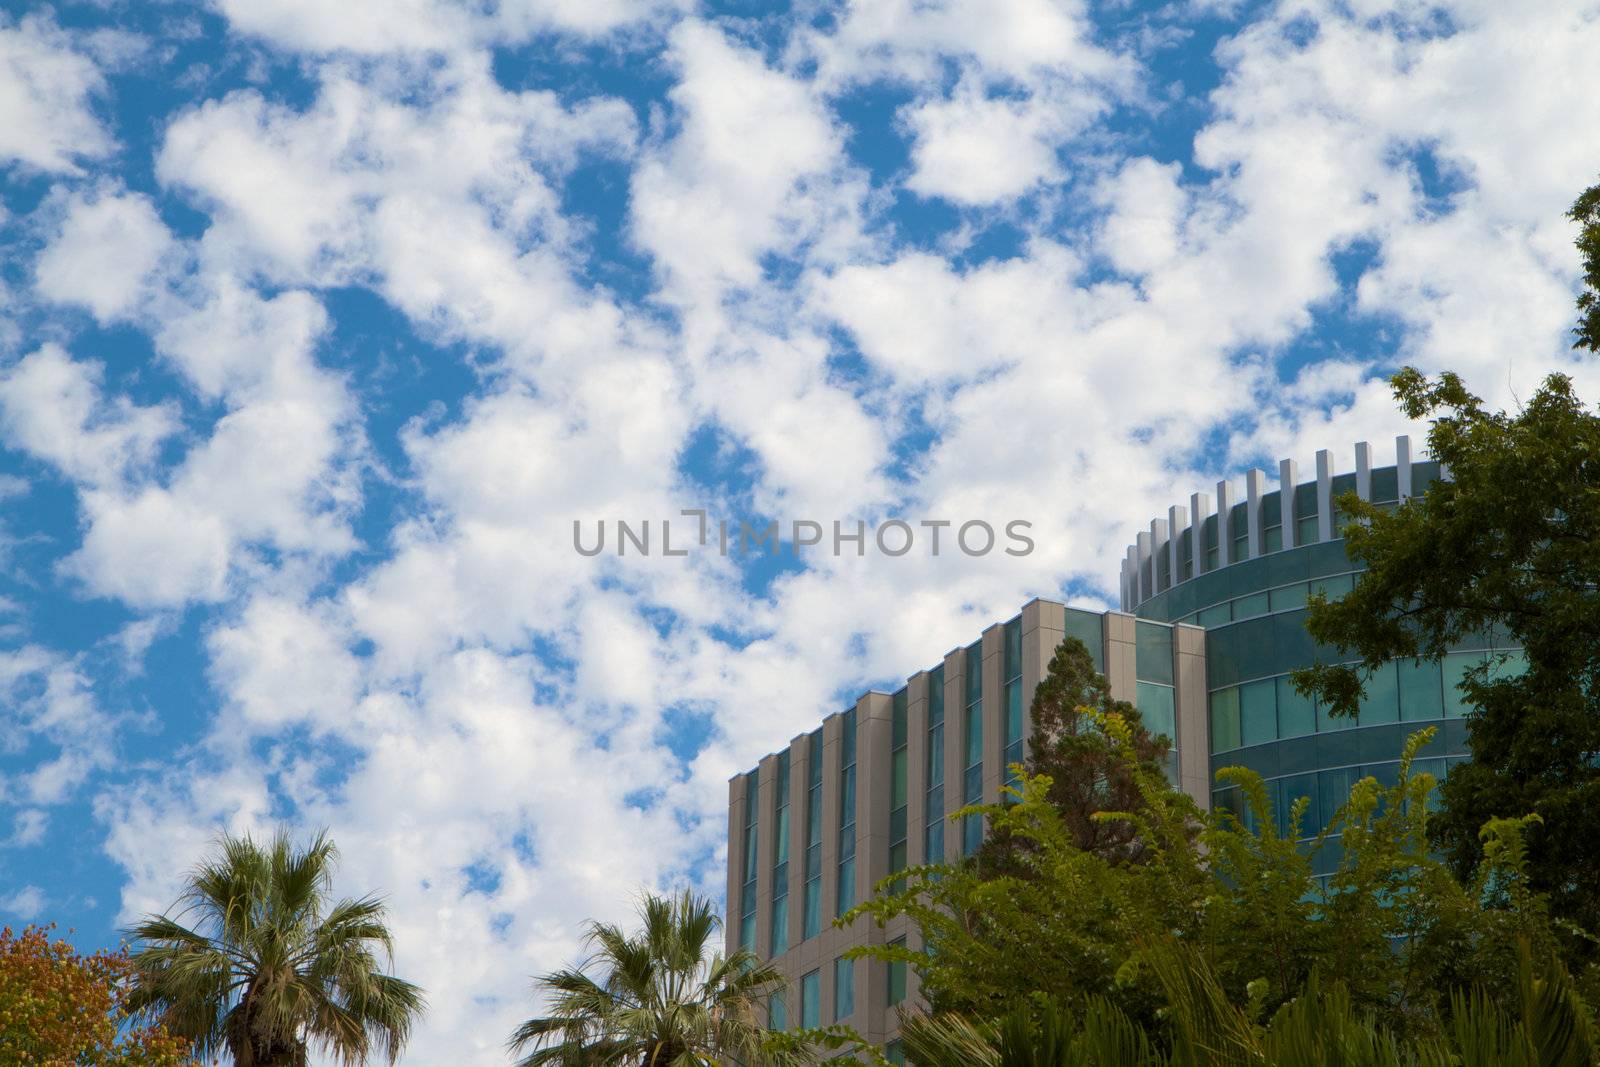 Blue green teal buildings against bright blue sky with puffy clouds